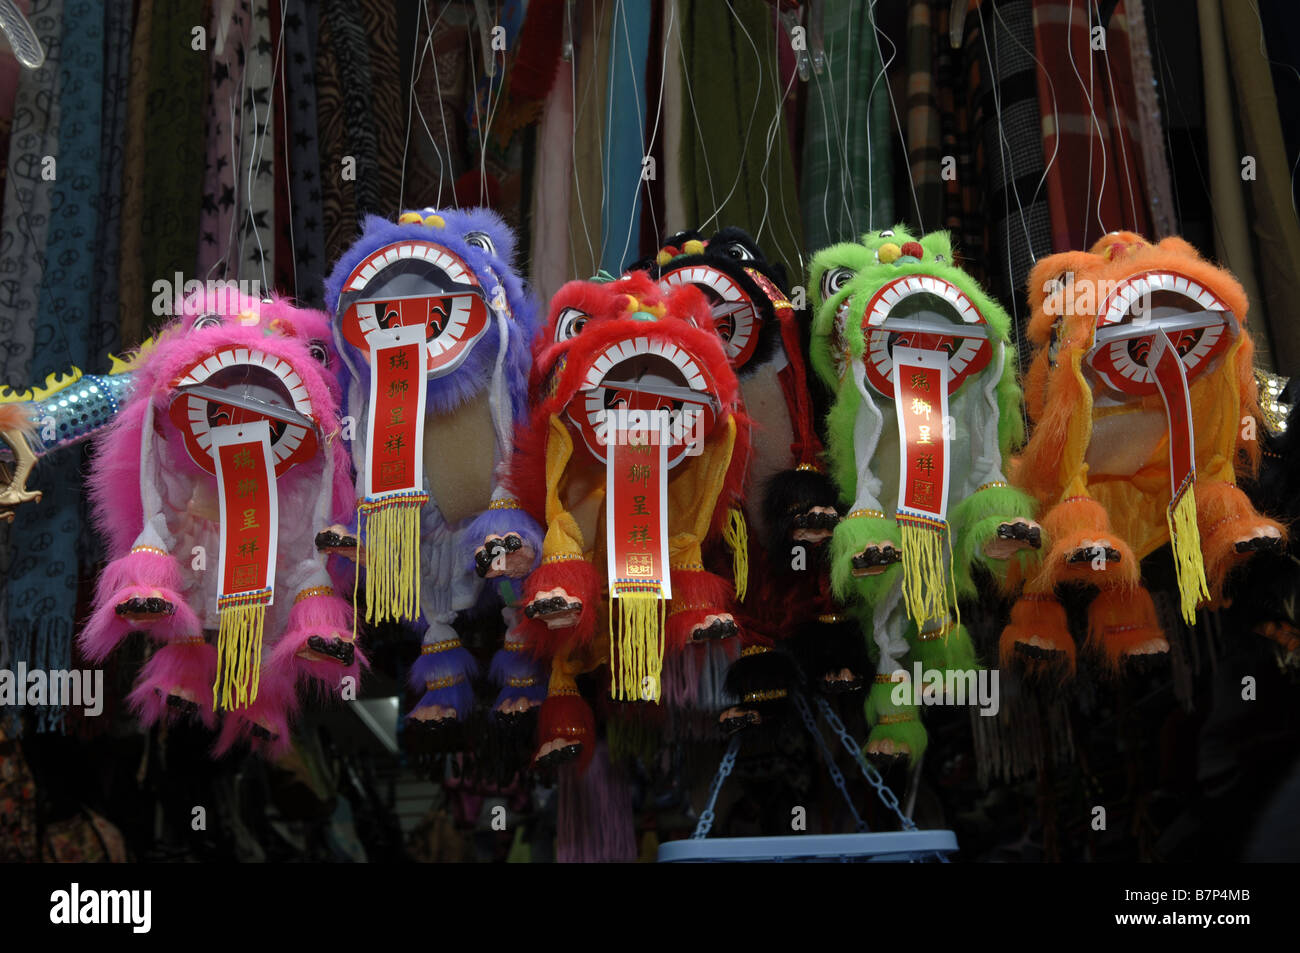 Miniature Lion dancing puppets for sale in New York City s Chinatown to celebrate Chinese New Year Stock Photo